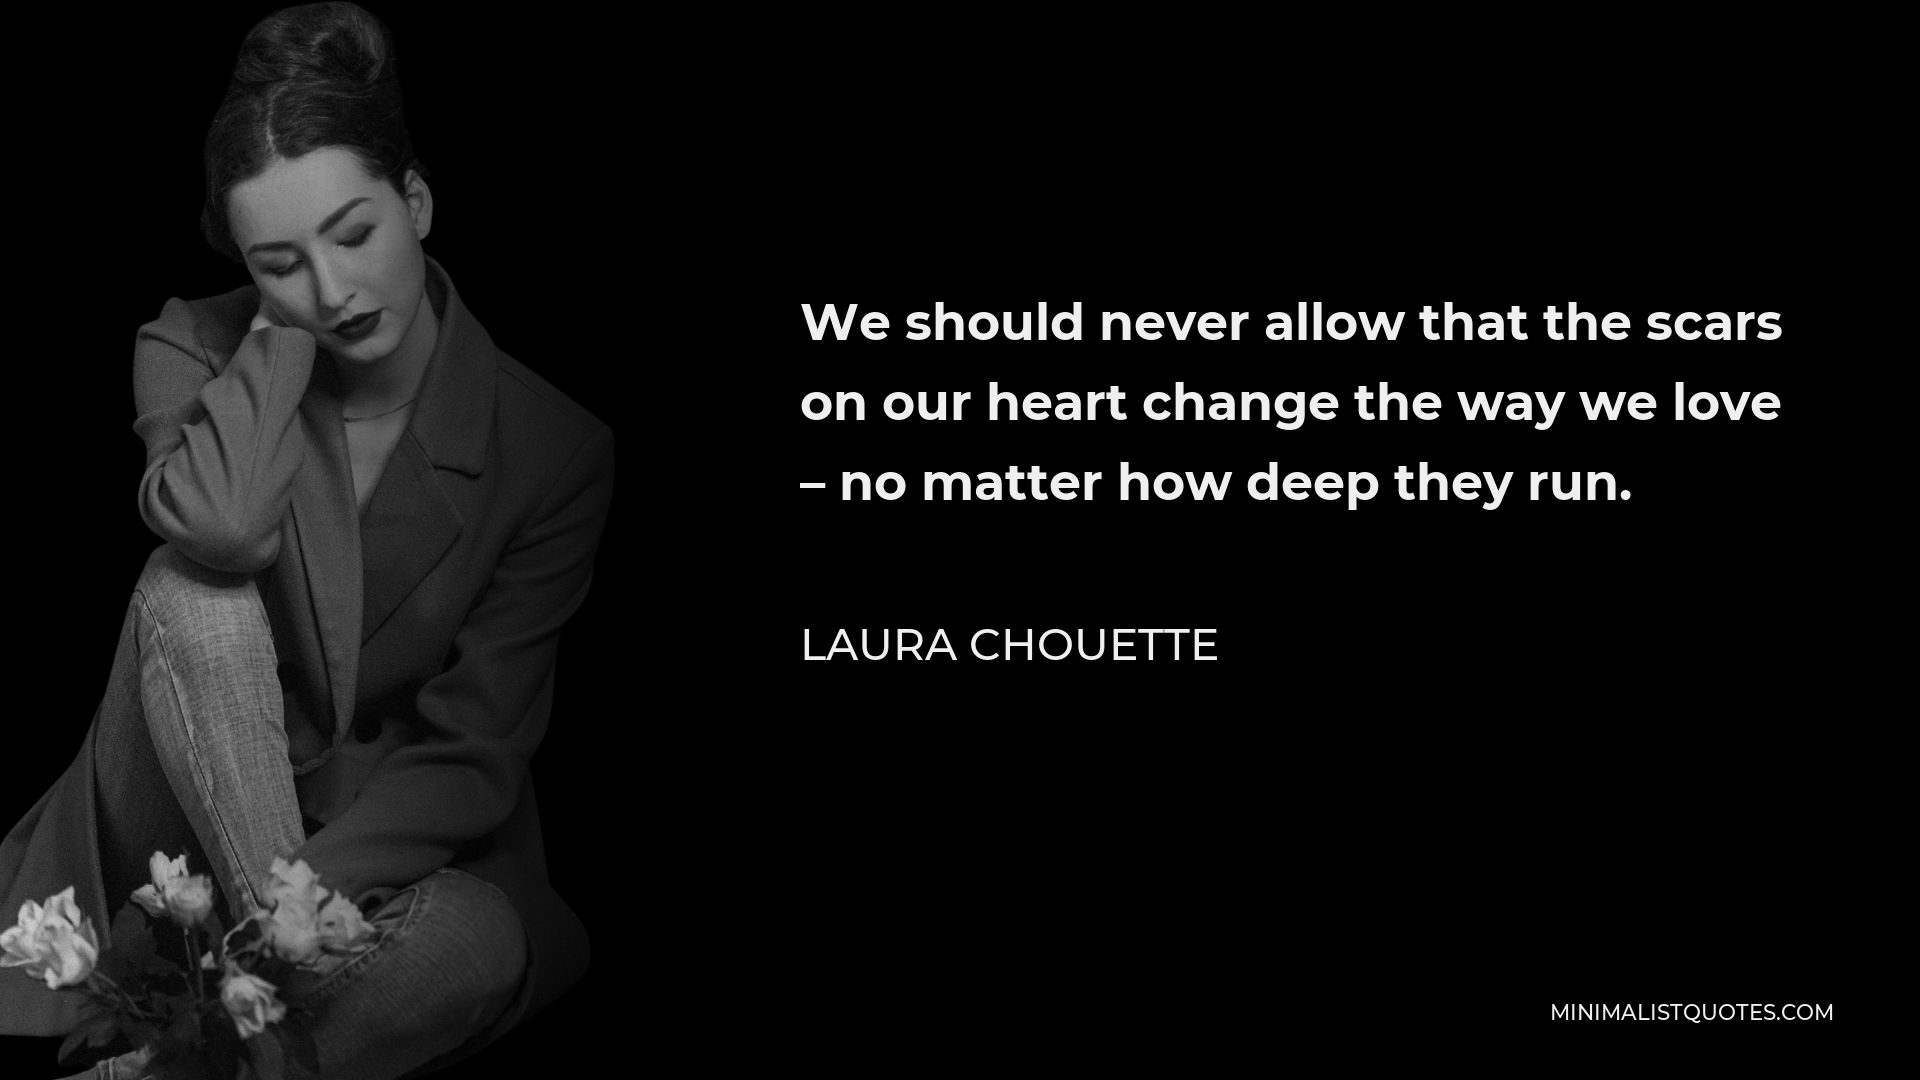 Laura Chouette Quote - We should never allow that the scars on our heart change the way we love – no matter how deep they run.